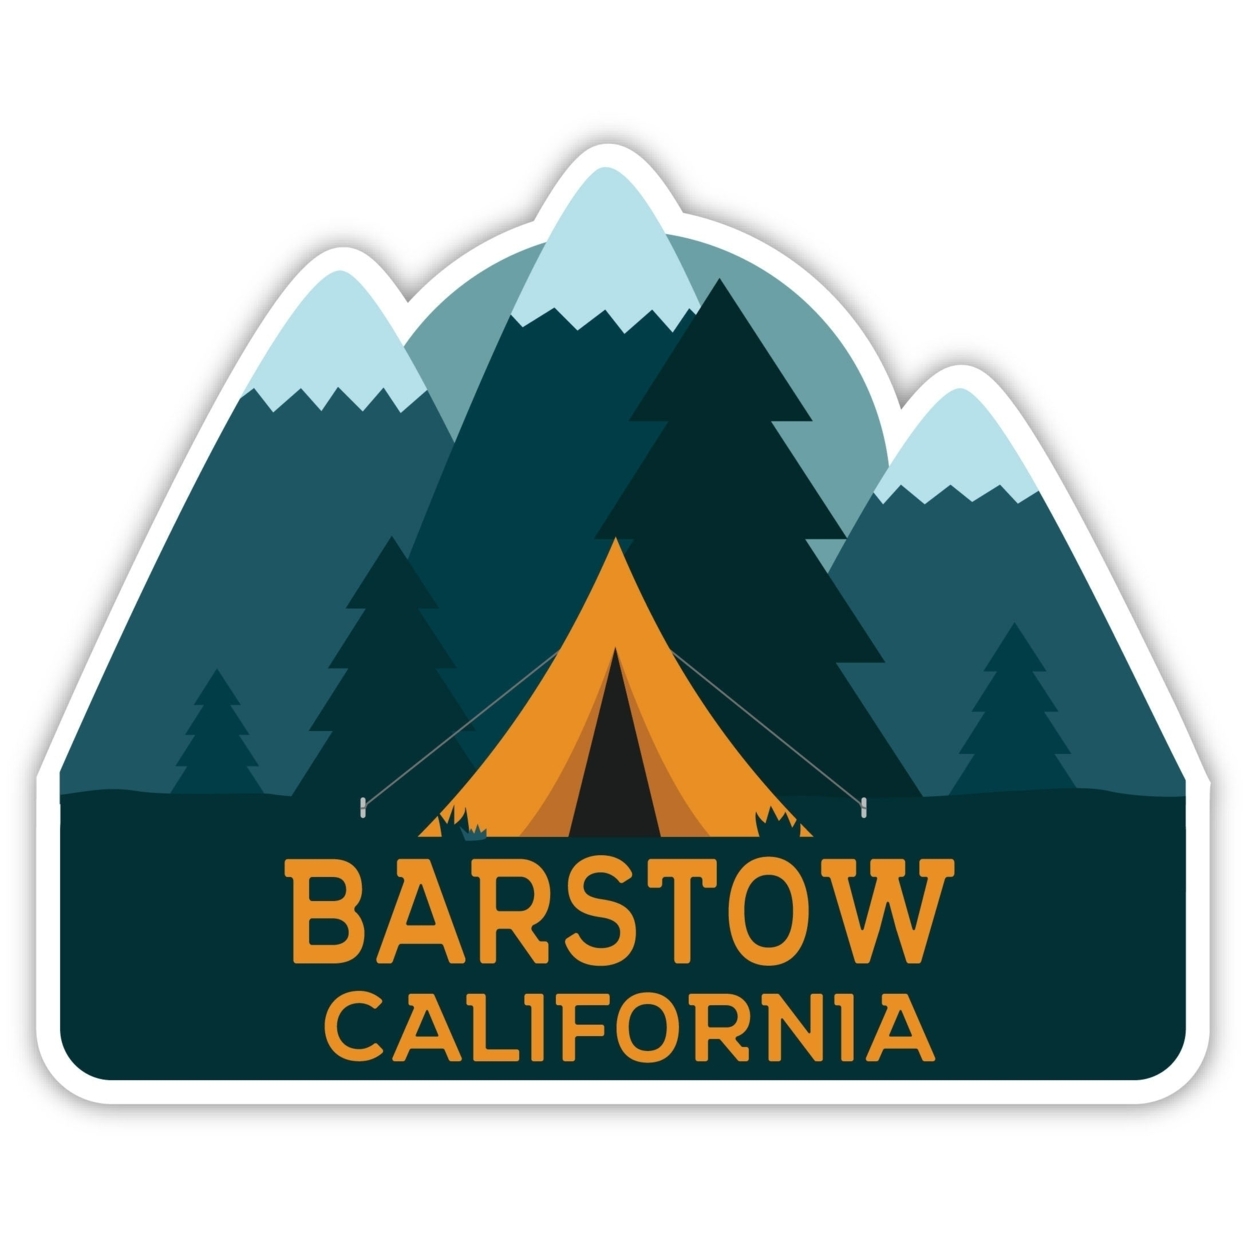 Barstow California Souvenir Decorative Stickers (Choose Theme And Size) - Single Unit, 6-Inch, Tent